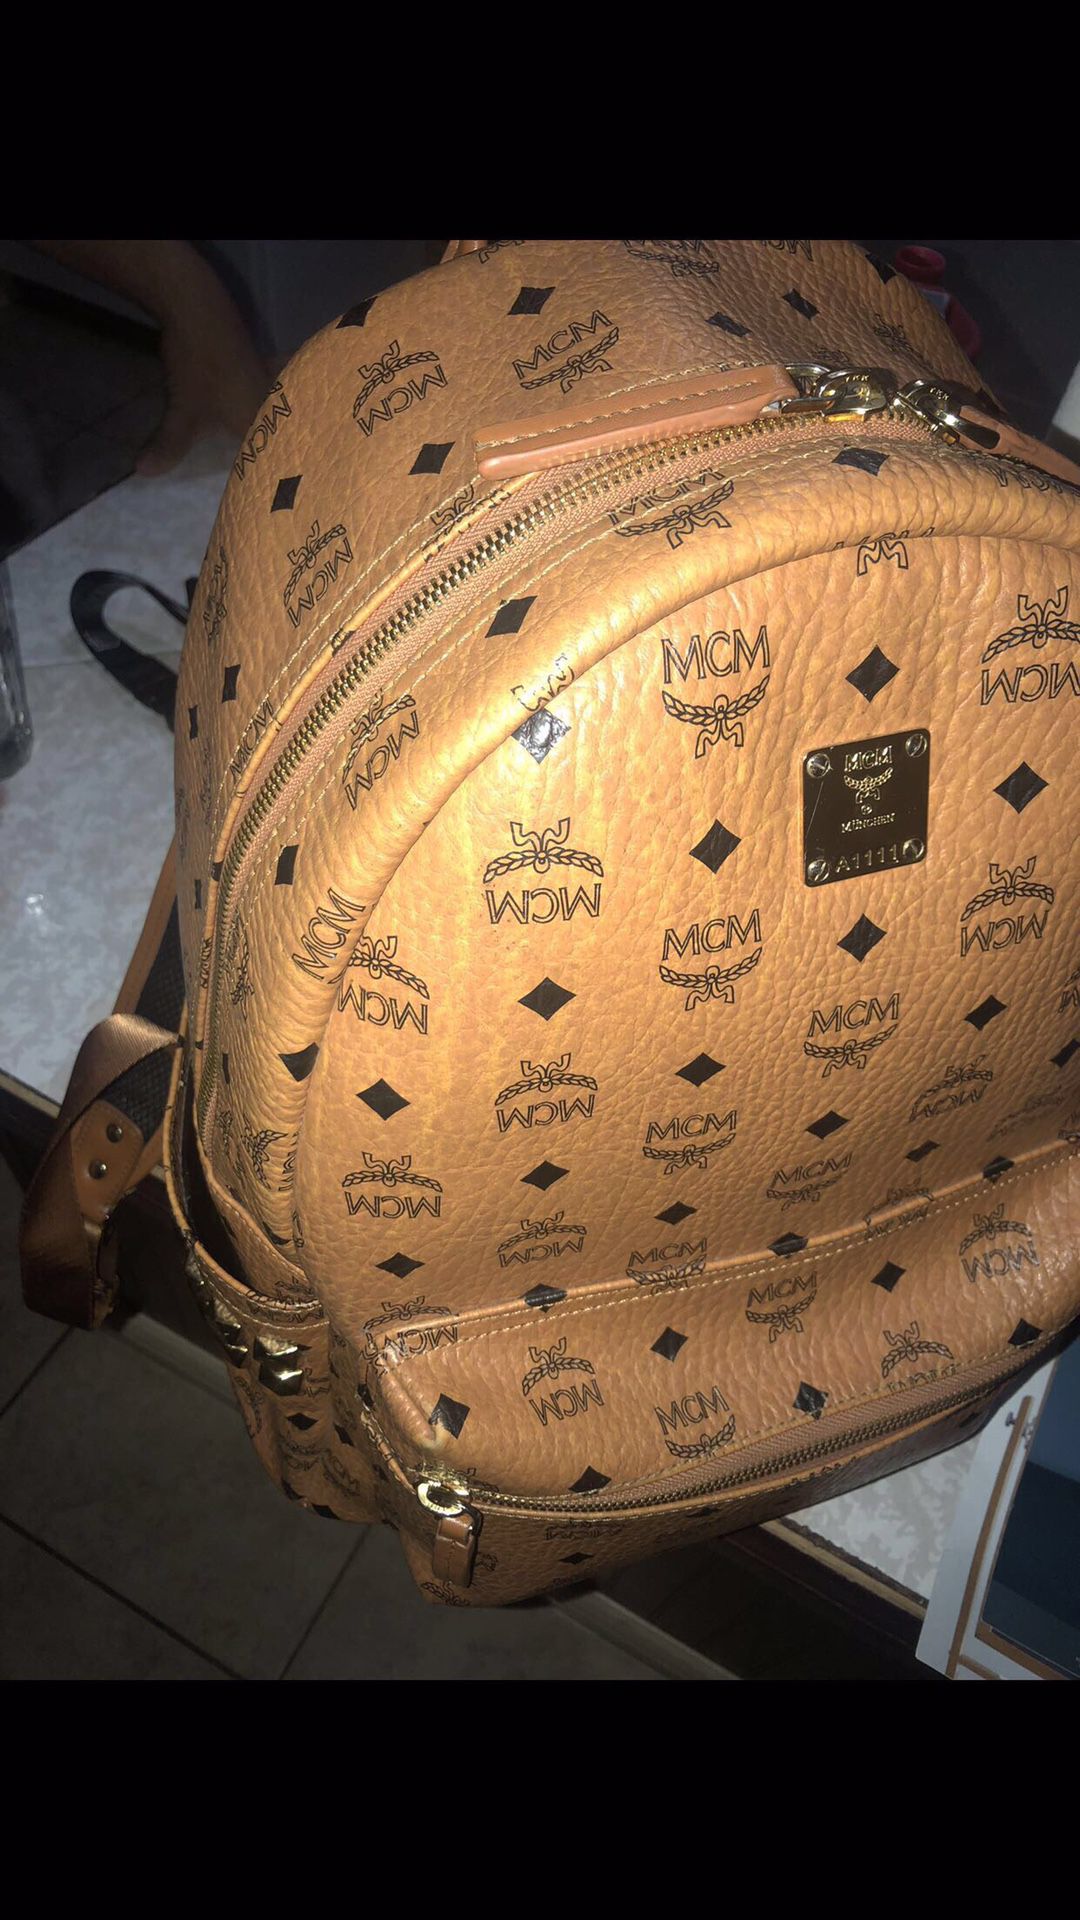 MCM Backpack $550 OBO NEGOTIABLE PRICE